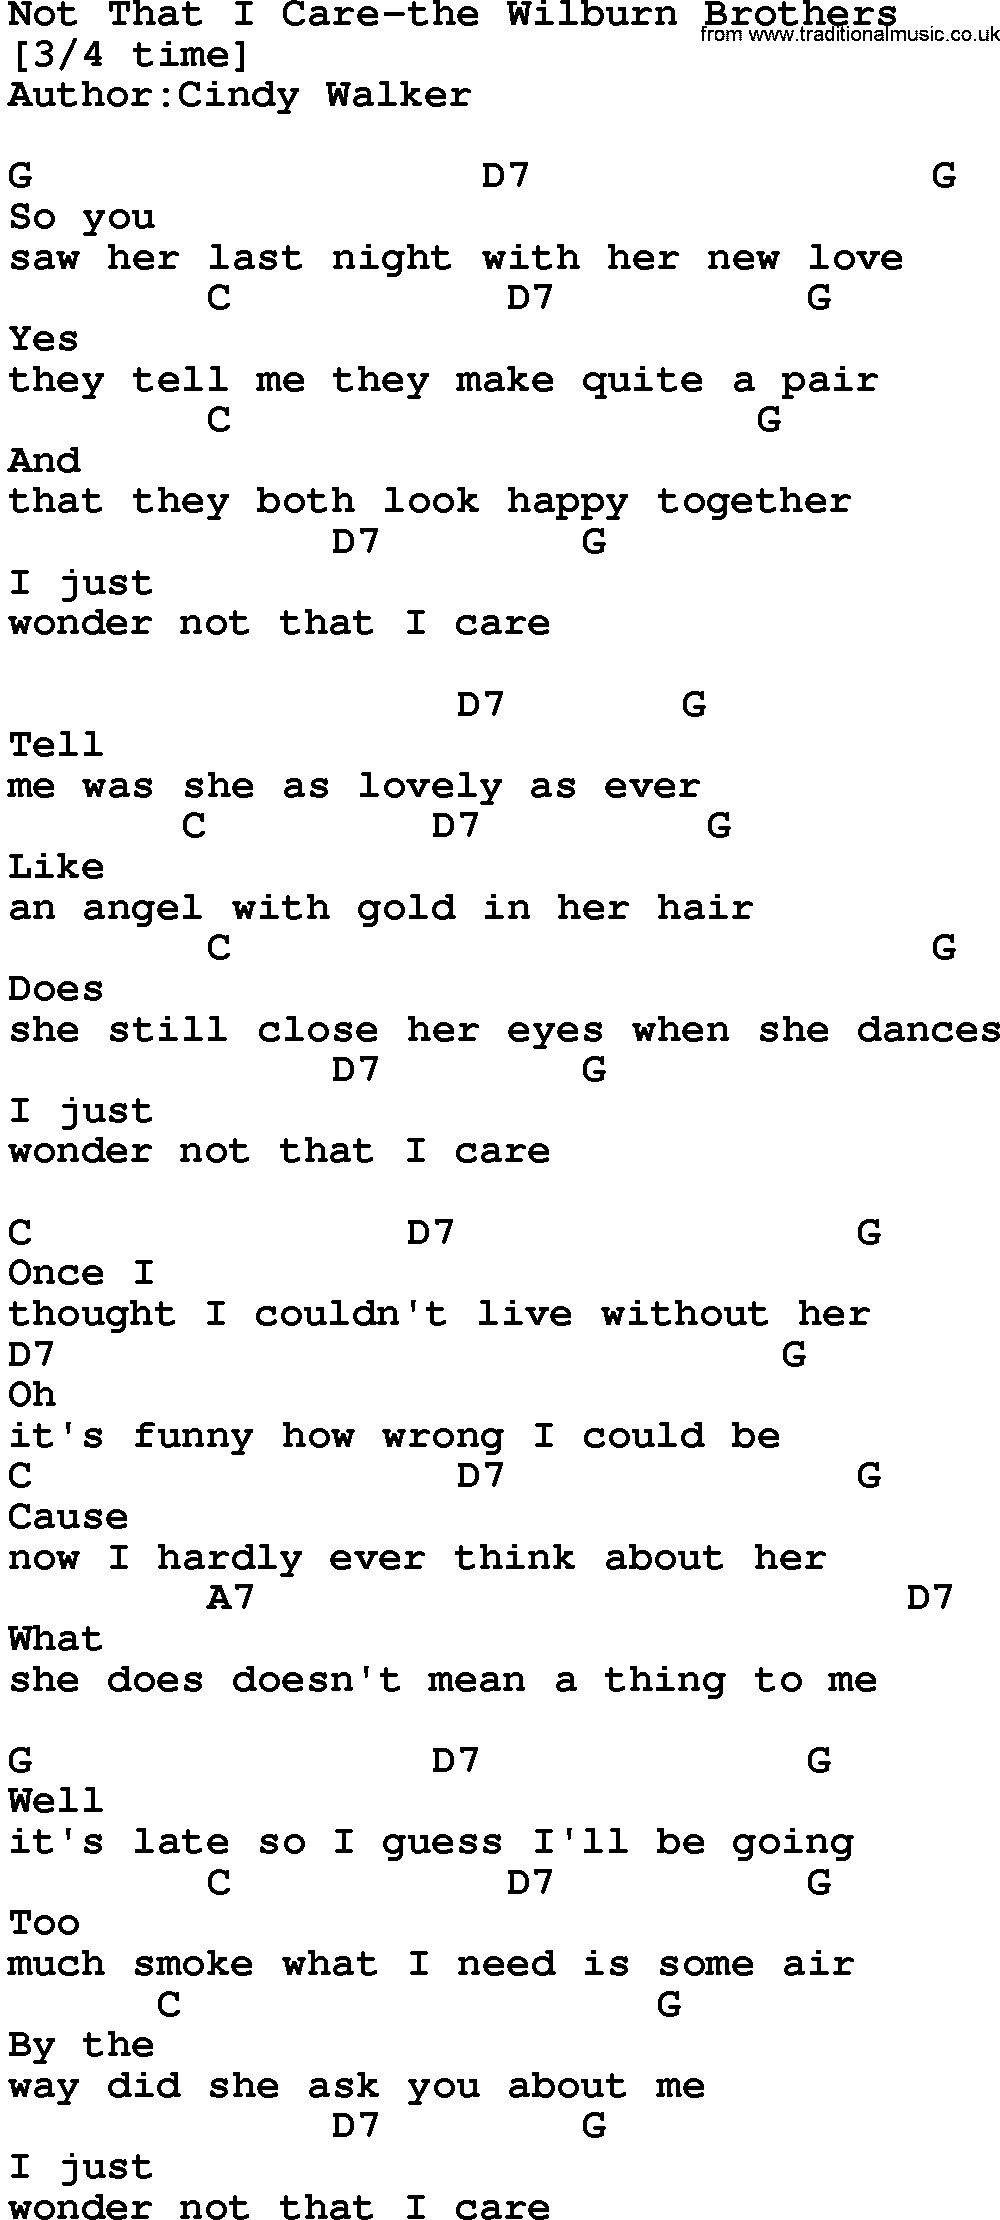 Country music song: Not That I Care-The Wilburn Brothers lyrics and chords